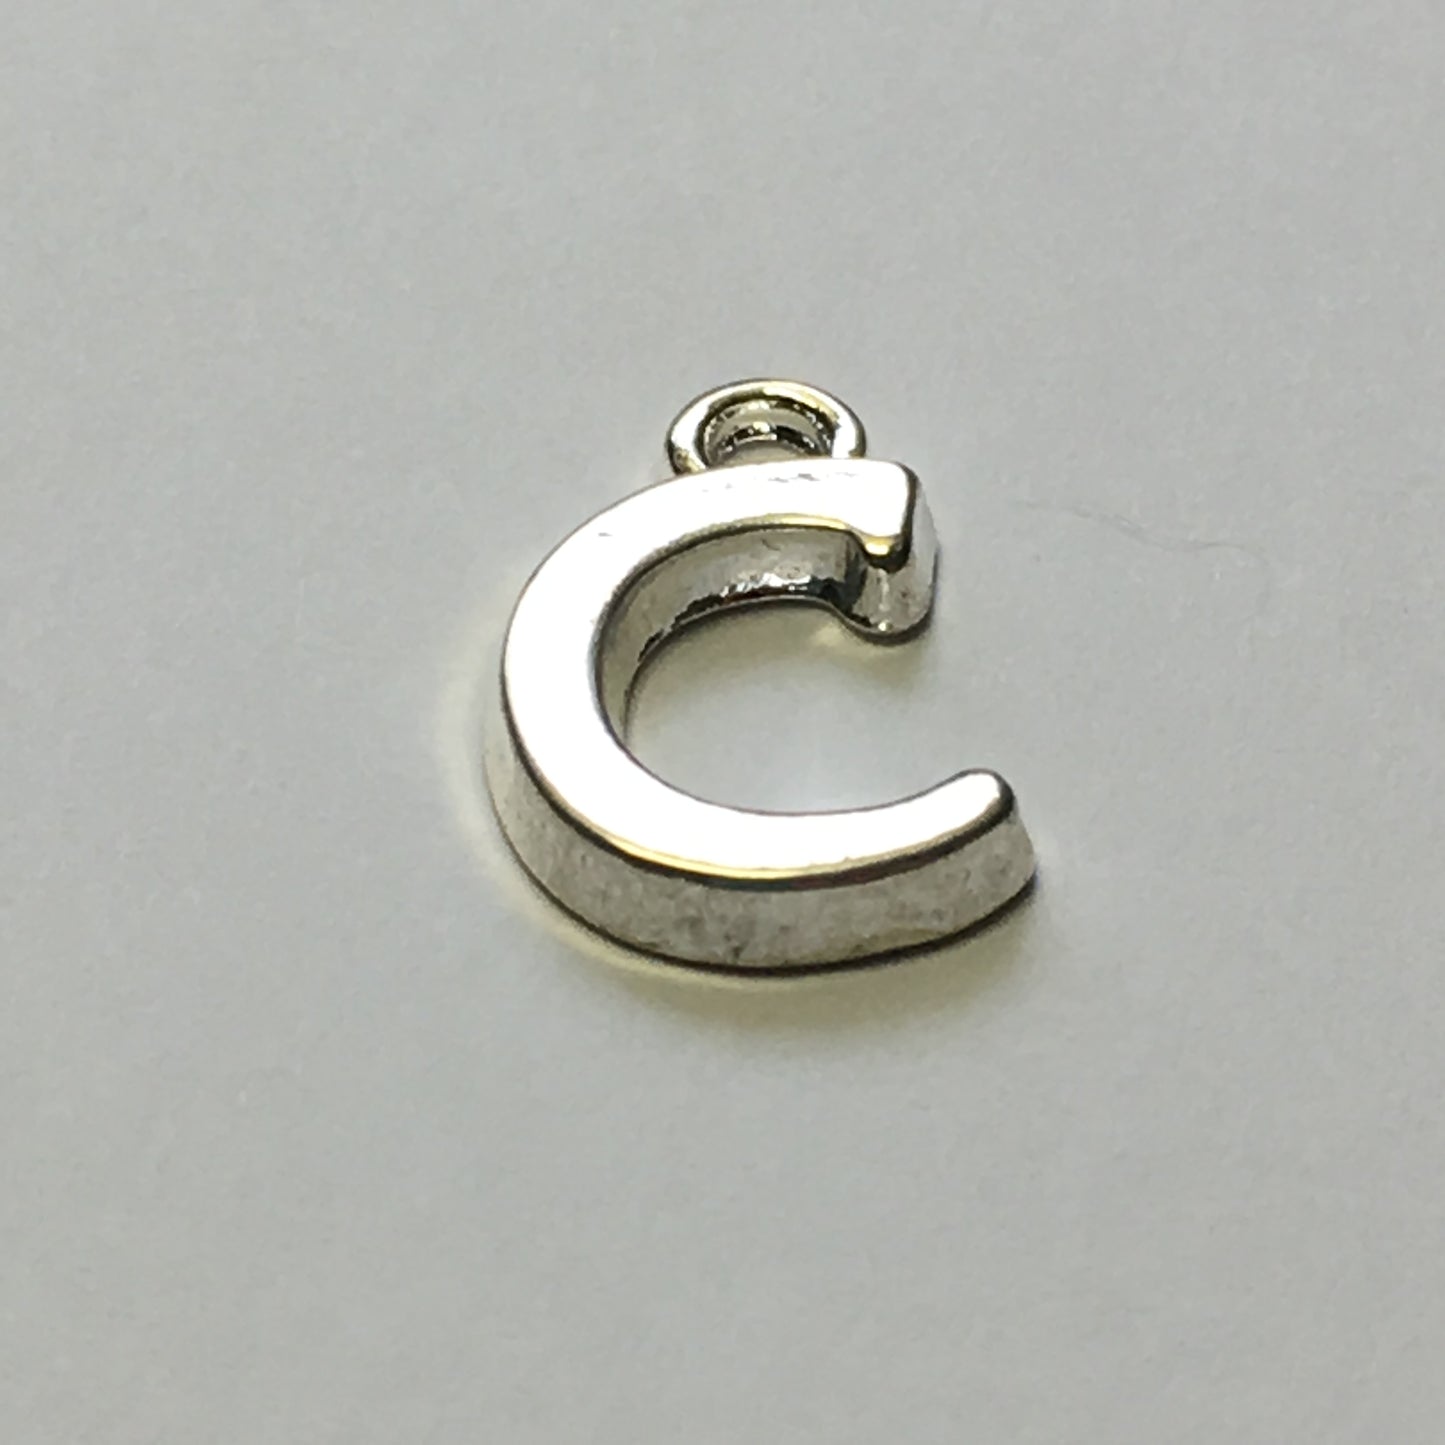 Silver Metal Plated Initial C Charm, 15 x 9 mm